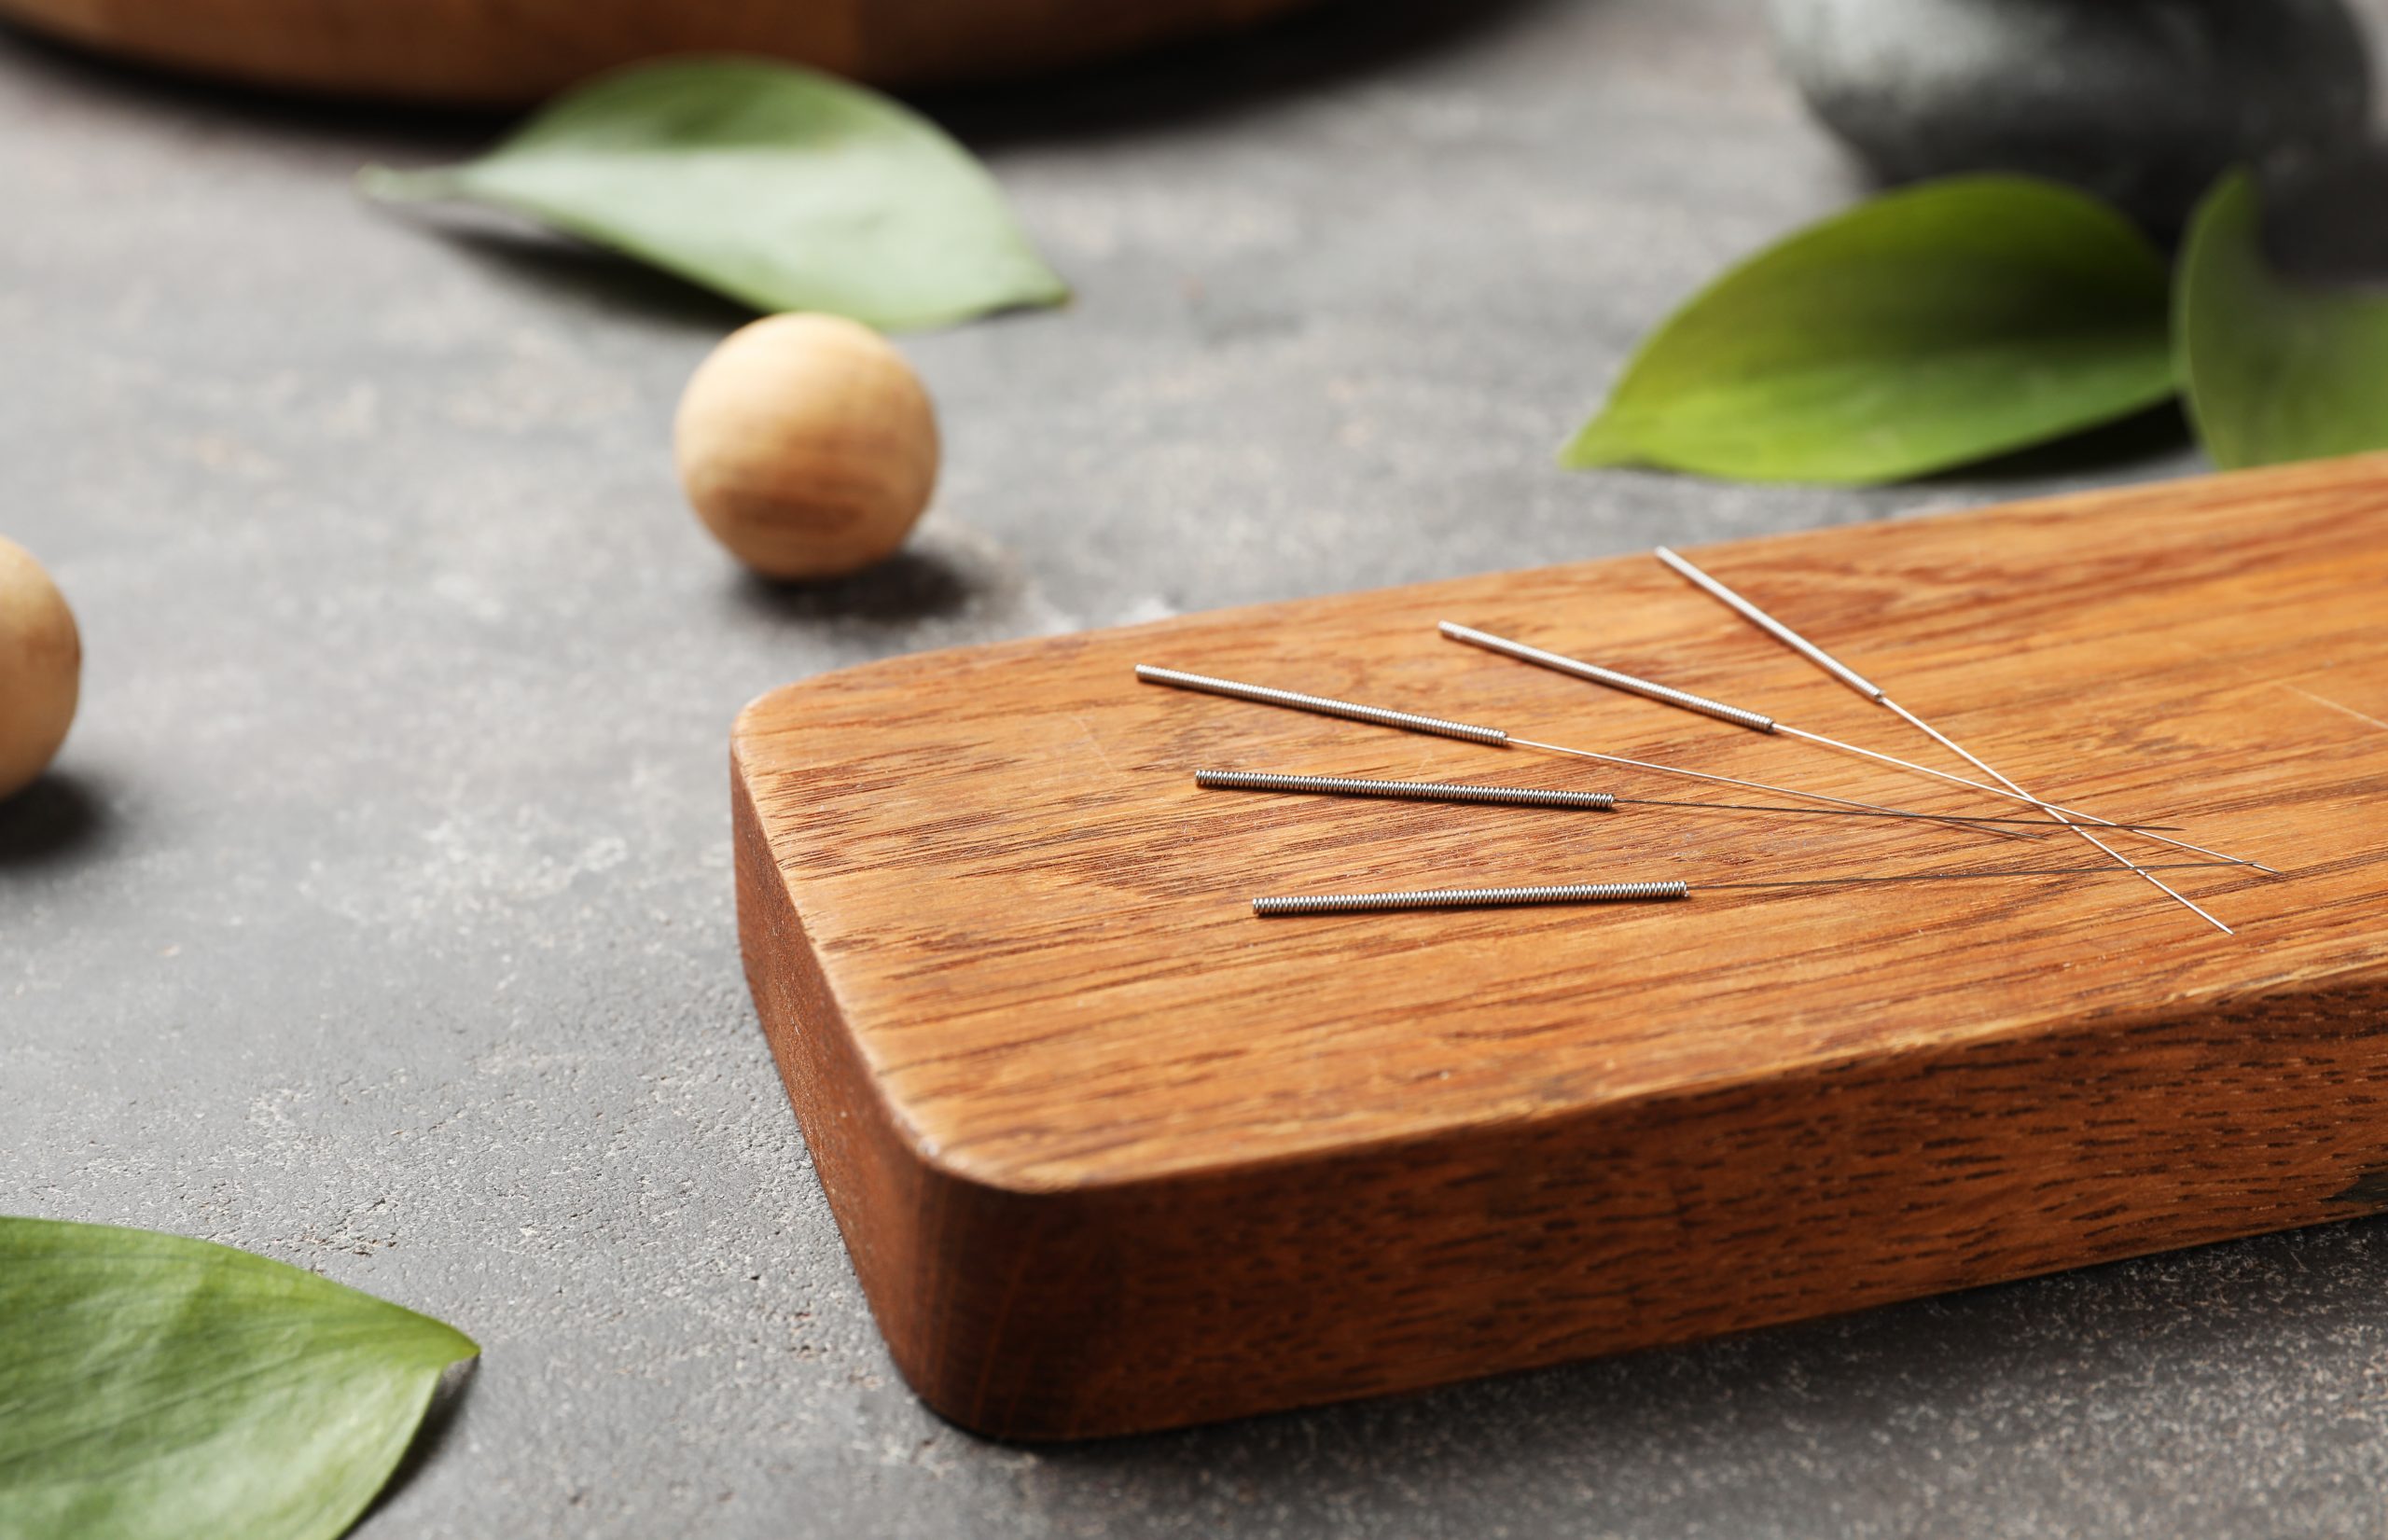 acupuncture wellness and prevention